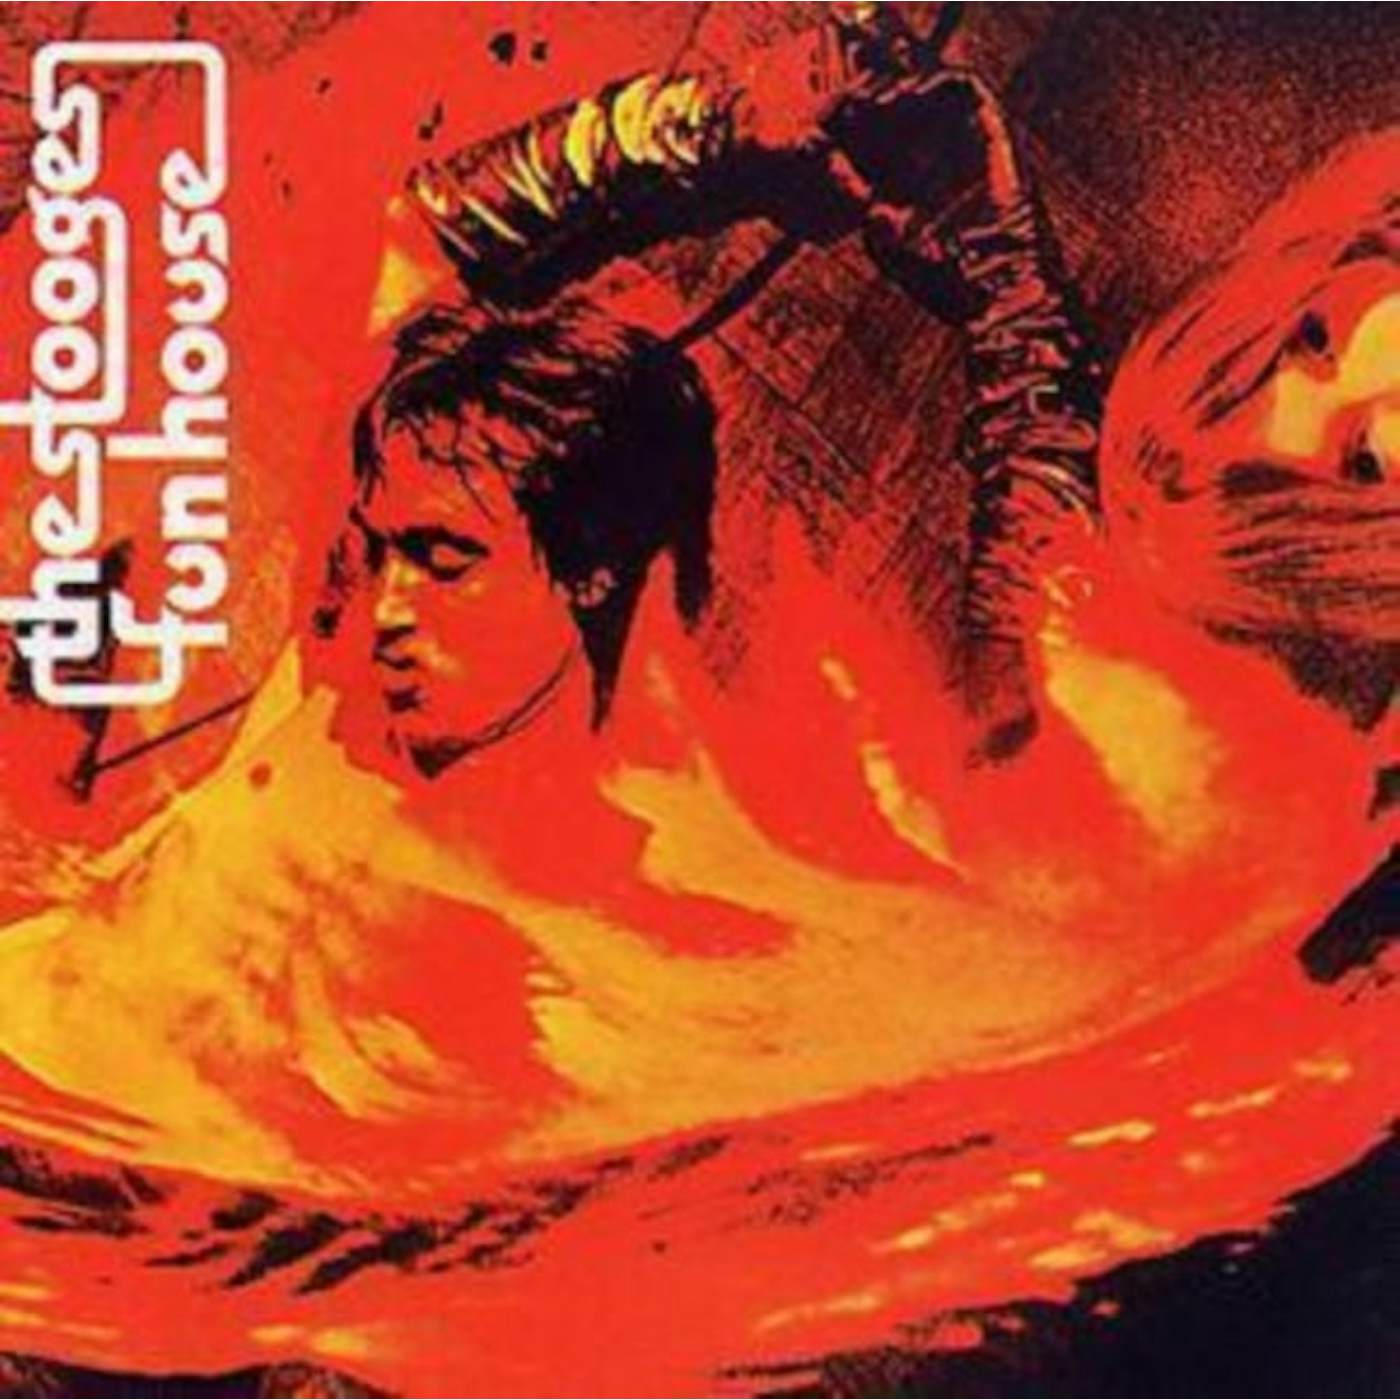 The Stooges CD - Fun House